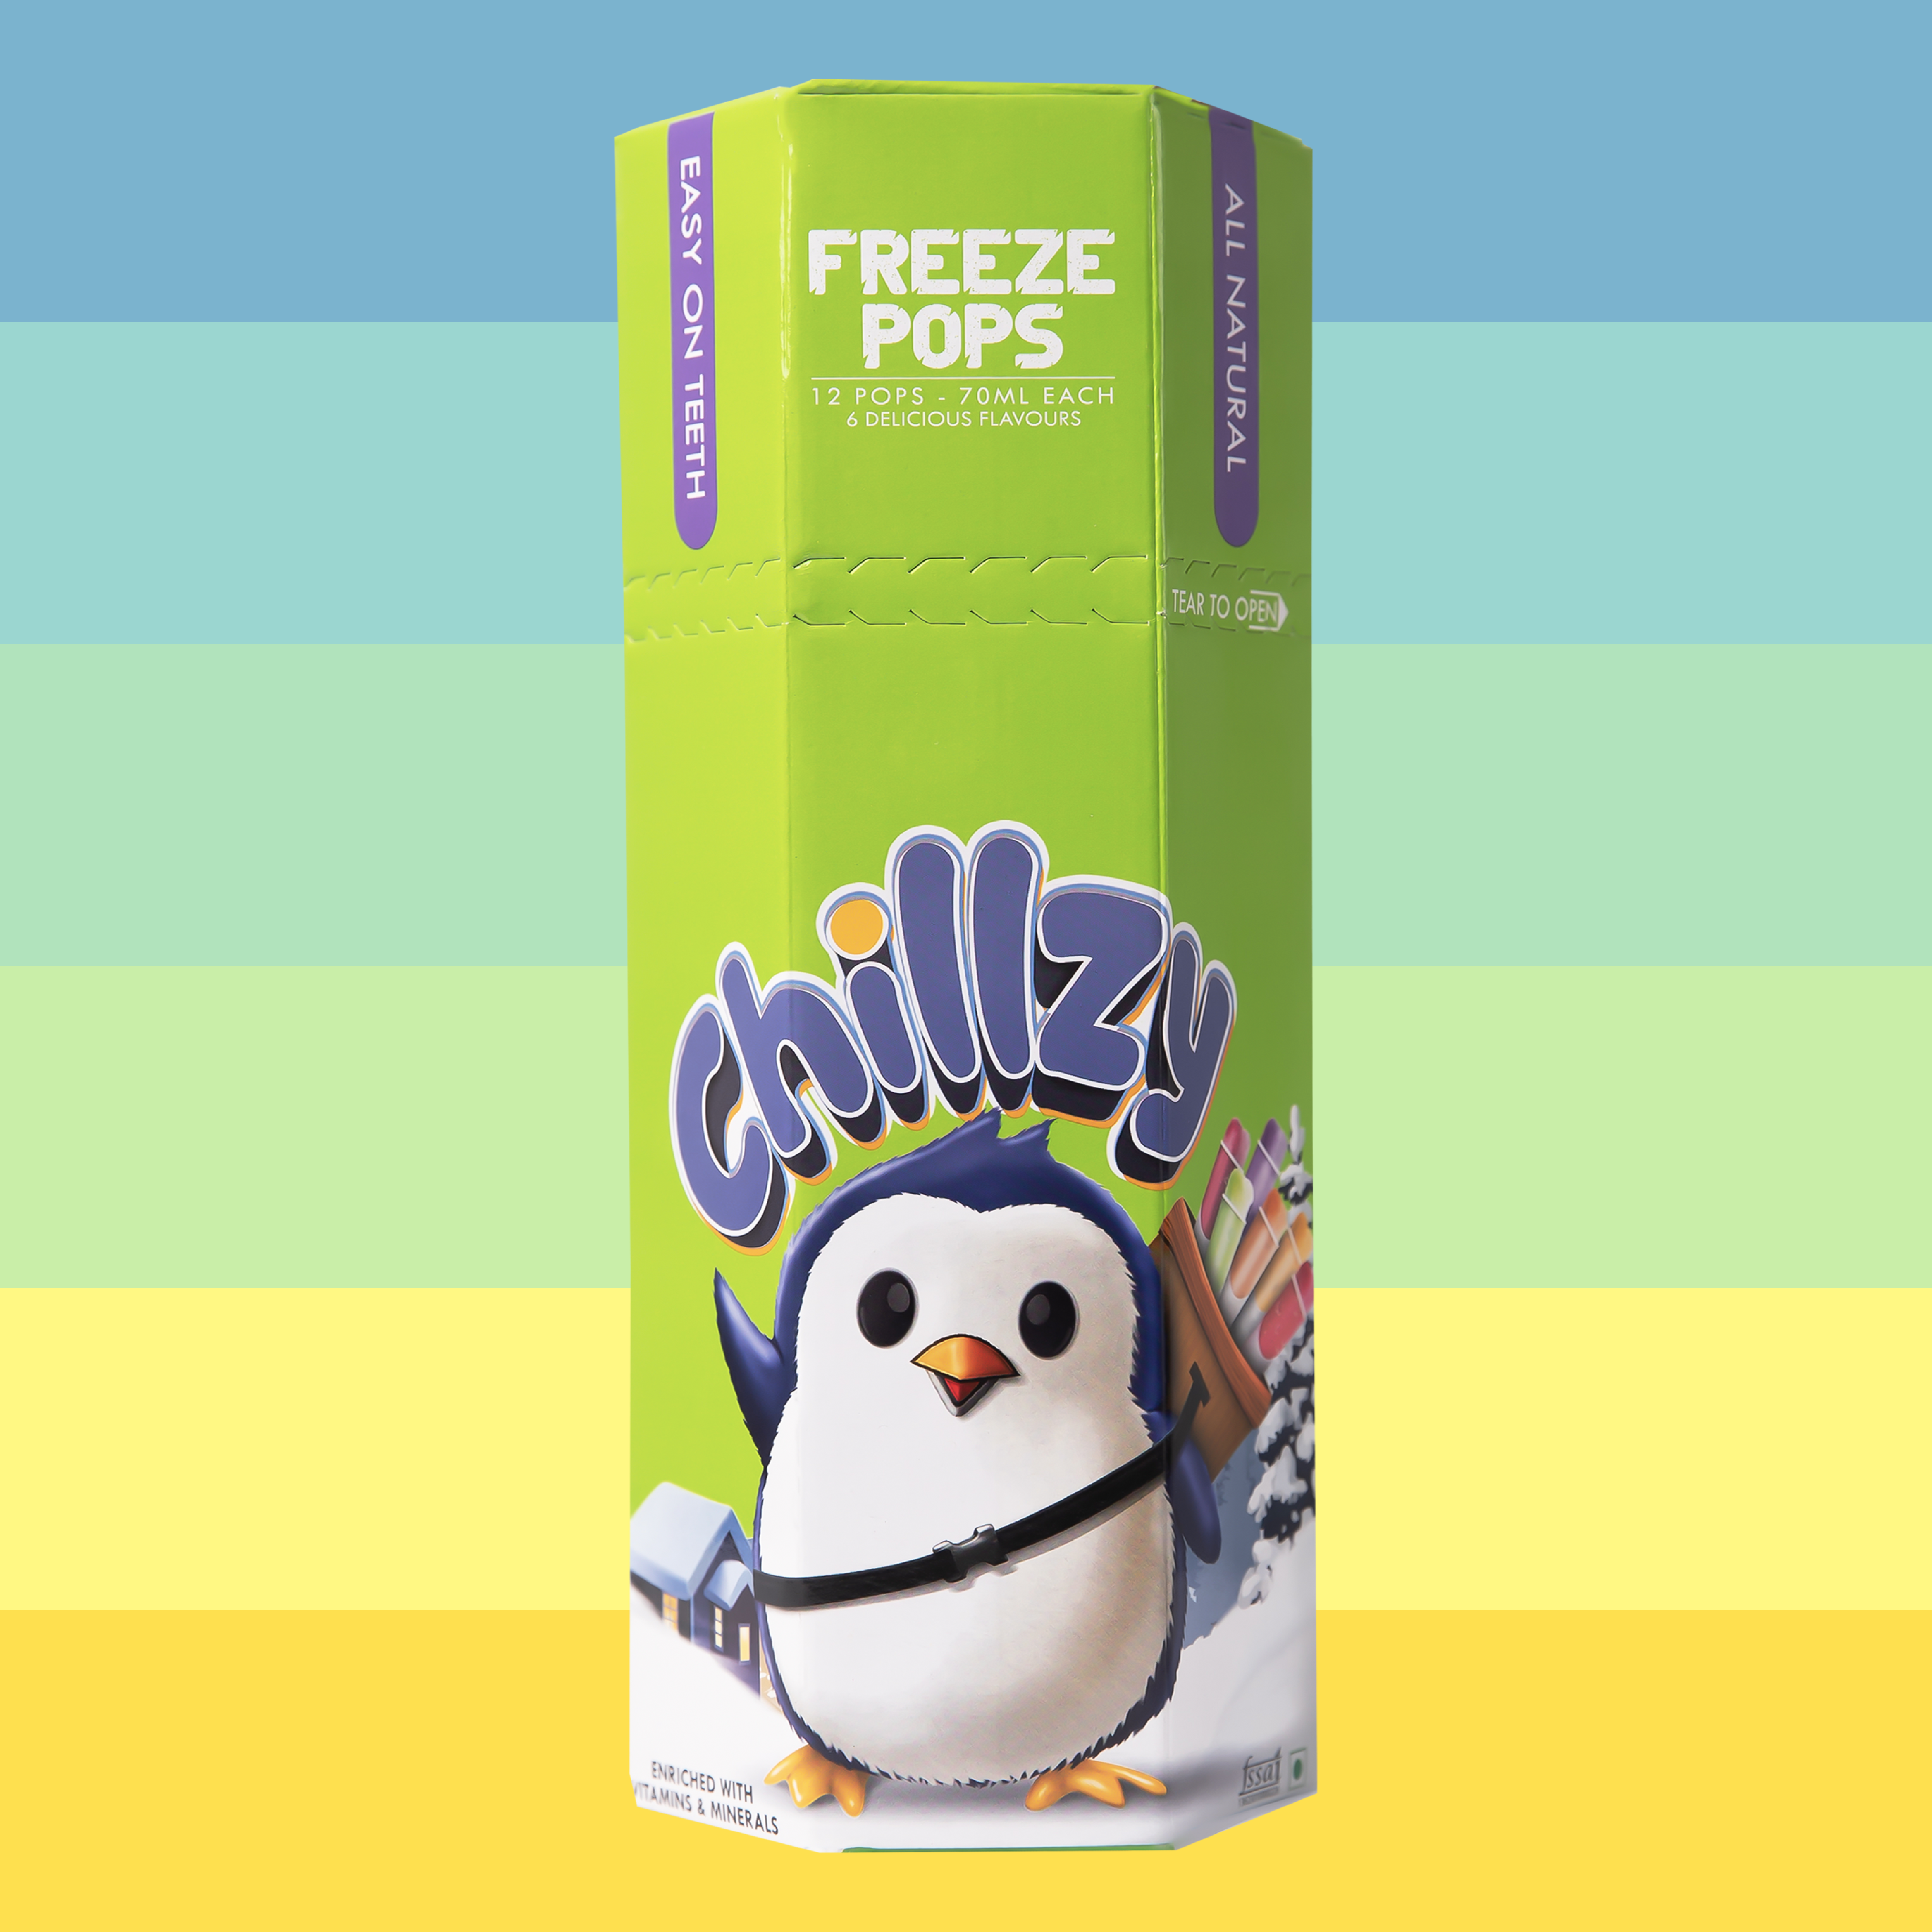 One Green Chillzy Freeze Pops box